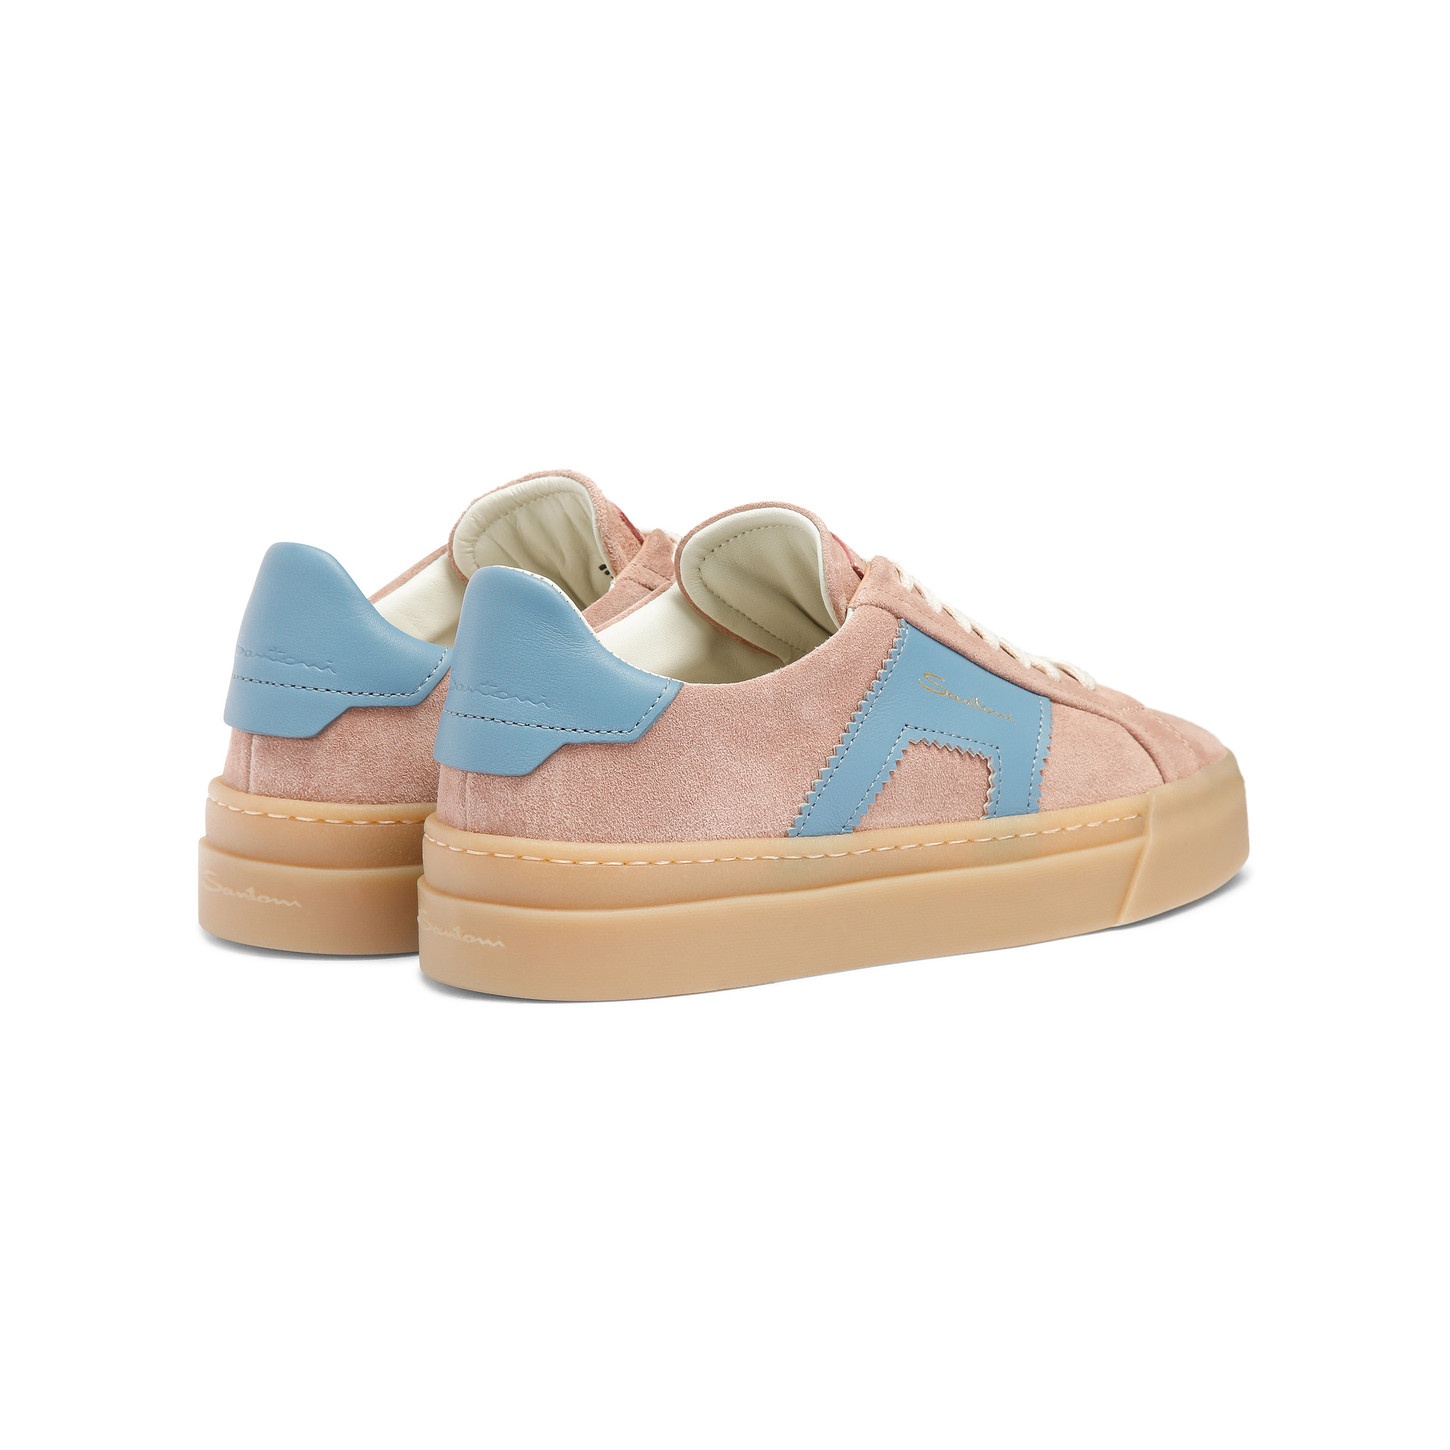 Women's pink and light blue suede and leather double buckle sneaker - 4